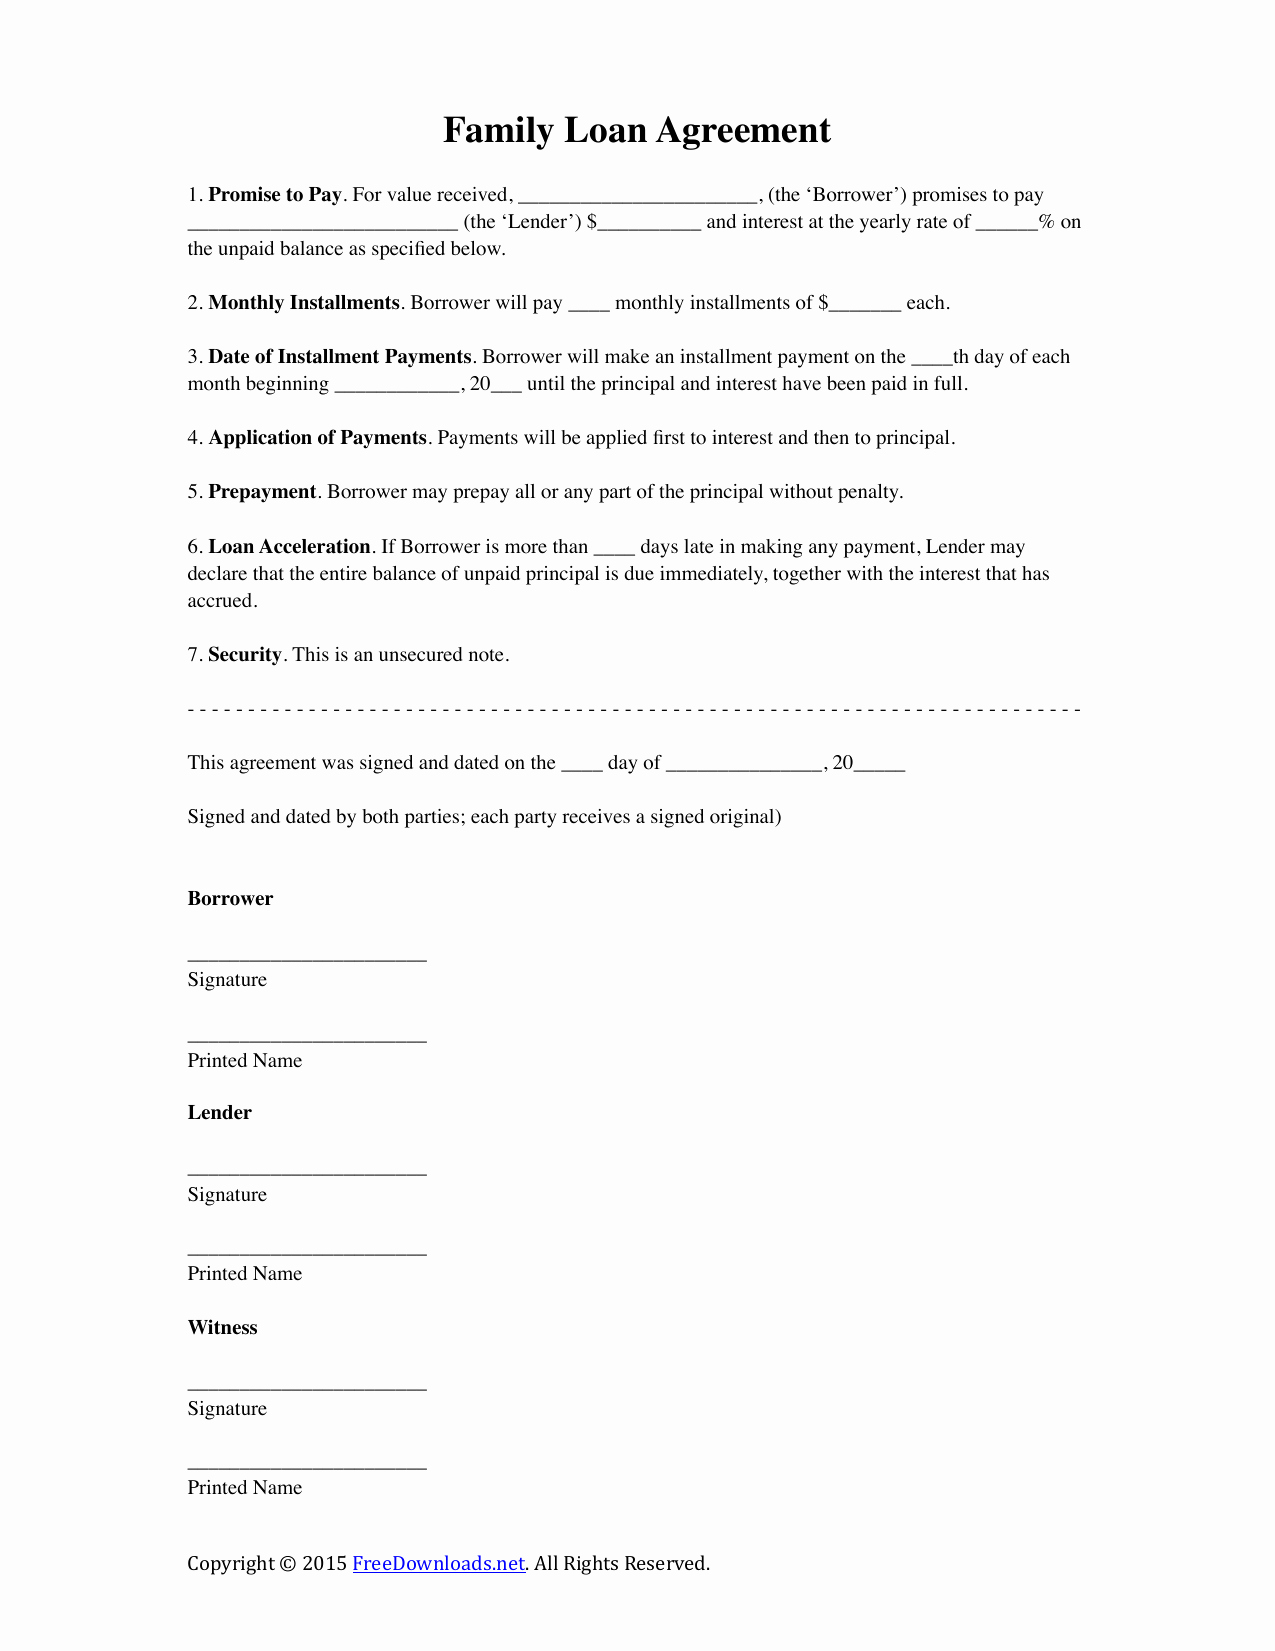 Family Loan Agreement Template Free New Download Family Loan Agreement Template Pdf Rtf